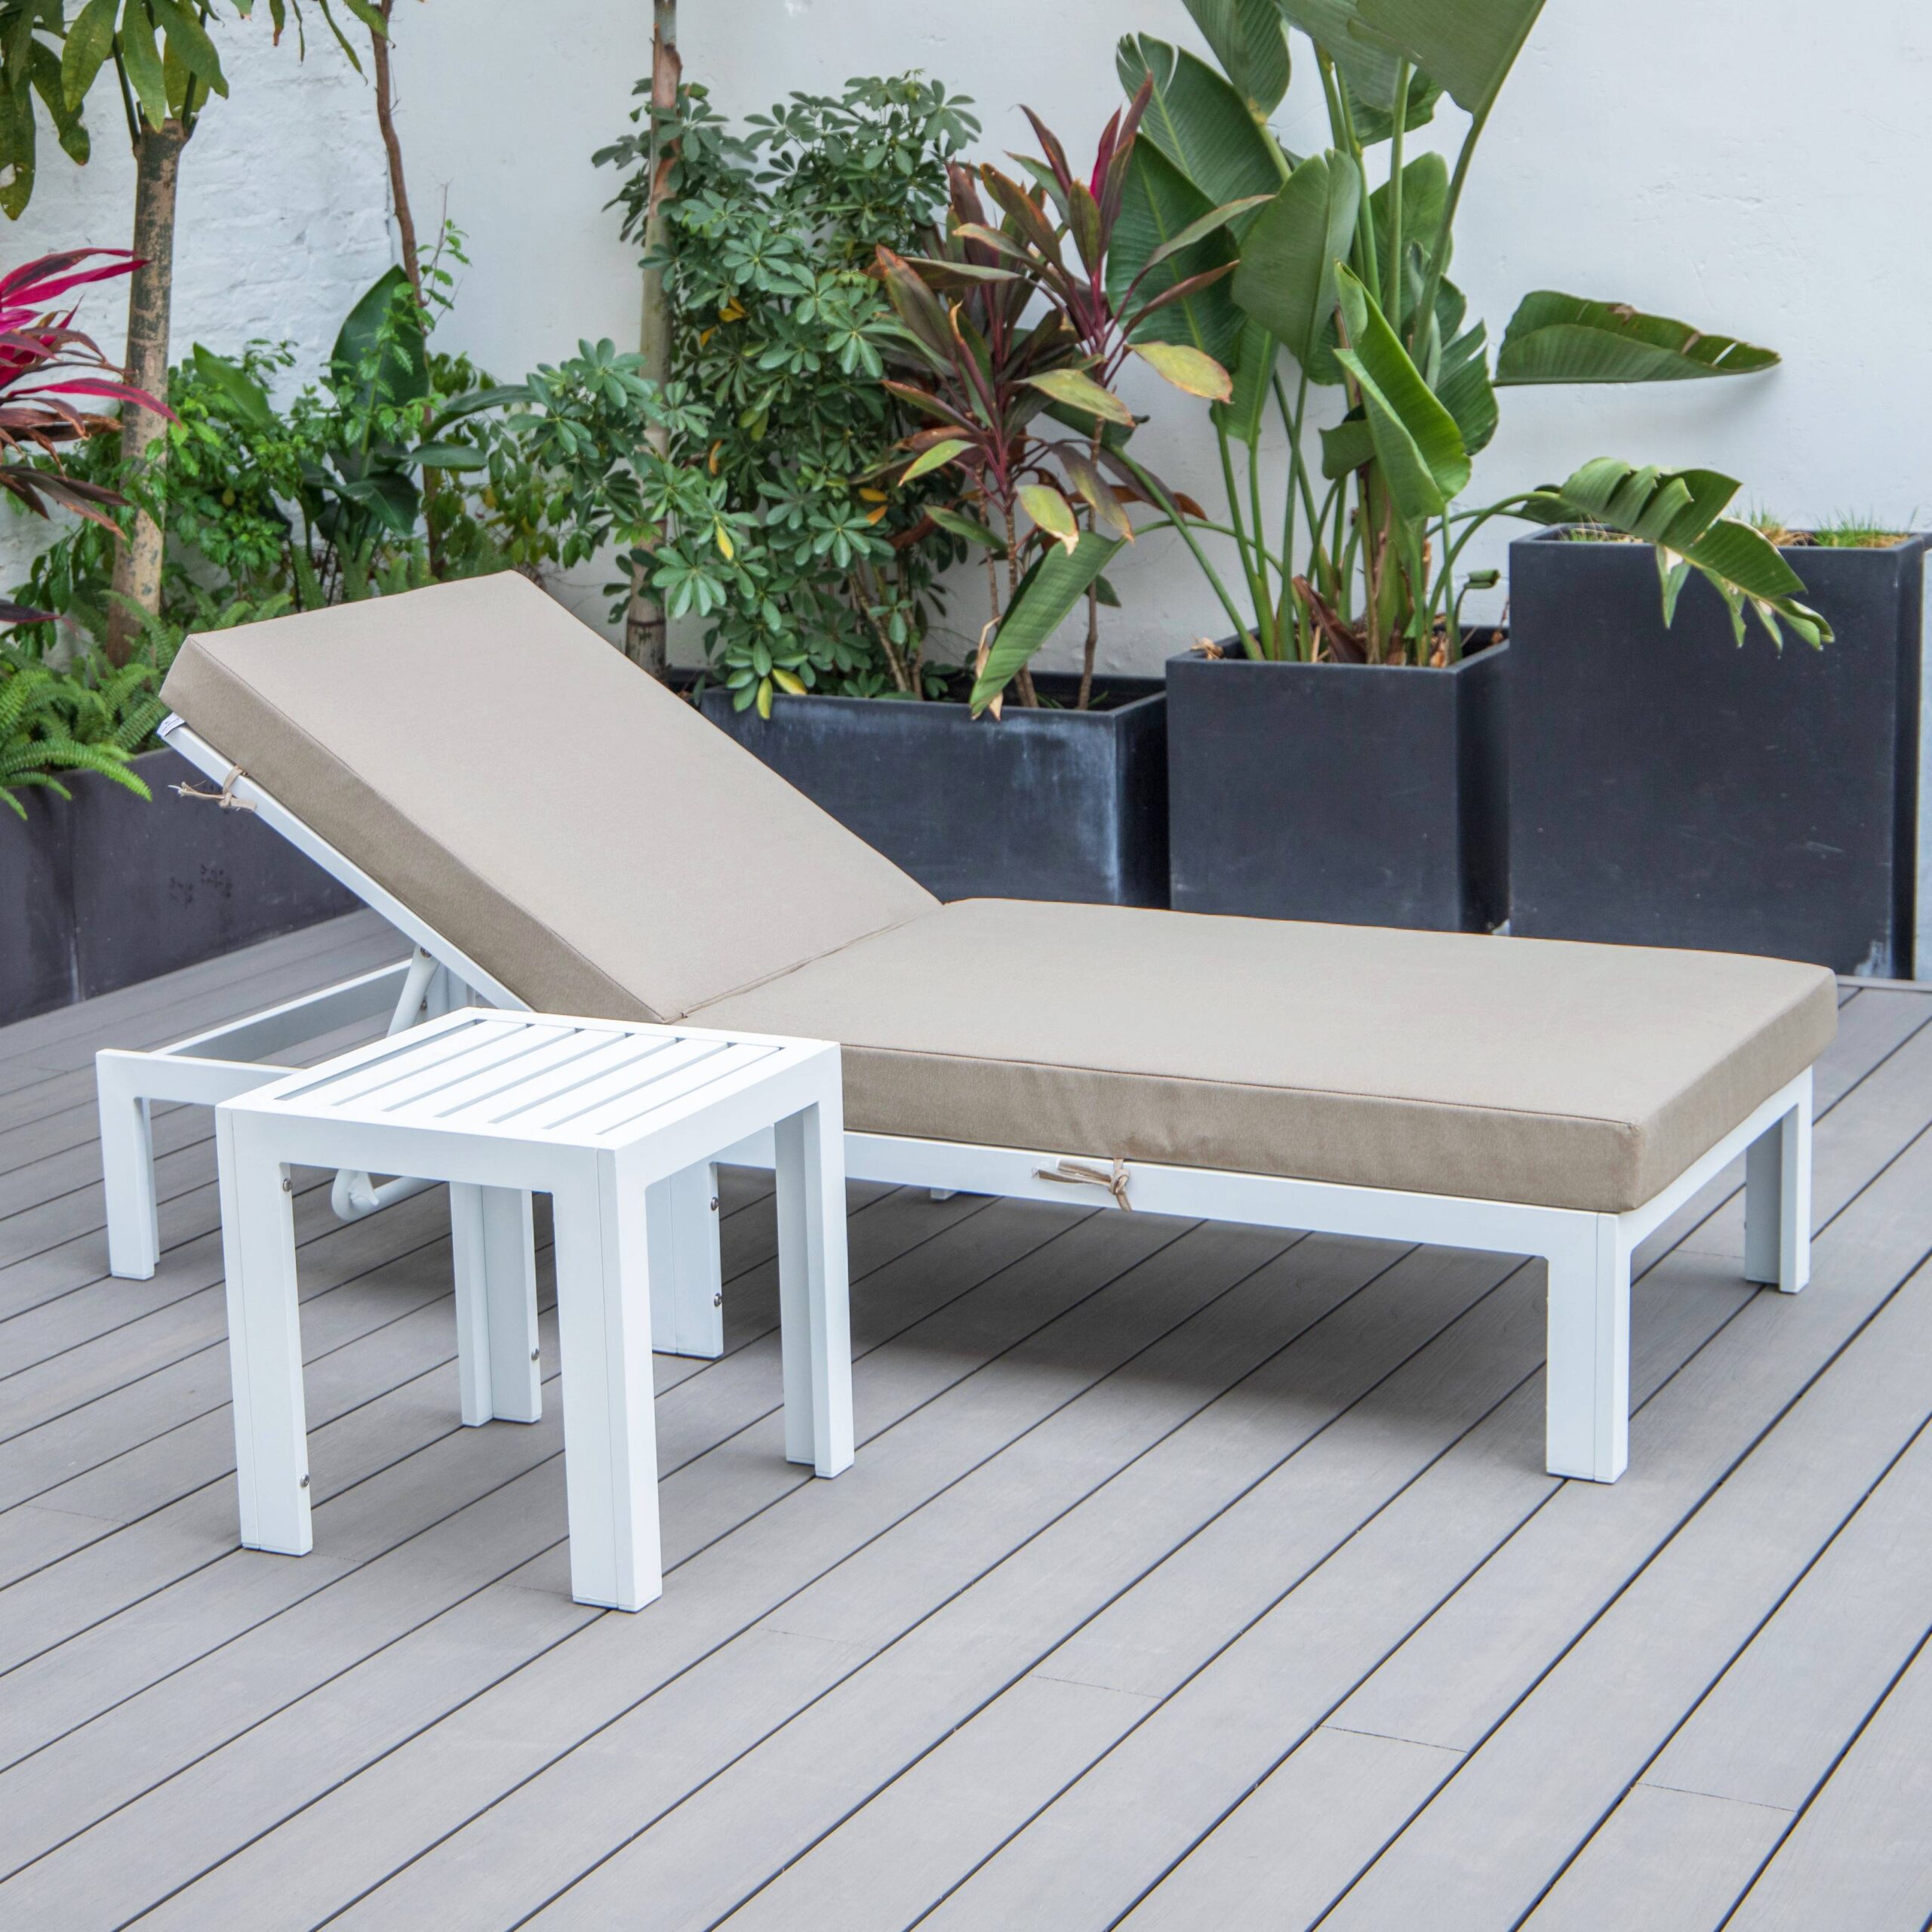 LeisureMod Chelsea Modern Weathered Grey Aluminum Outdoor Chaise Lounge Chair With Side Table & Beige Cushions - image 4 of 13